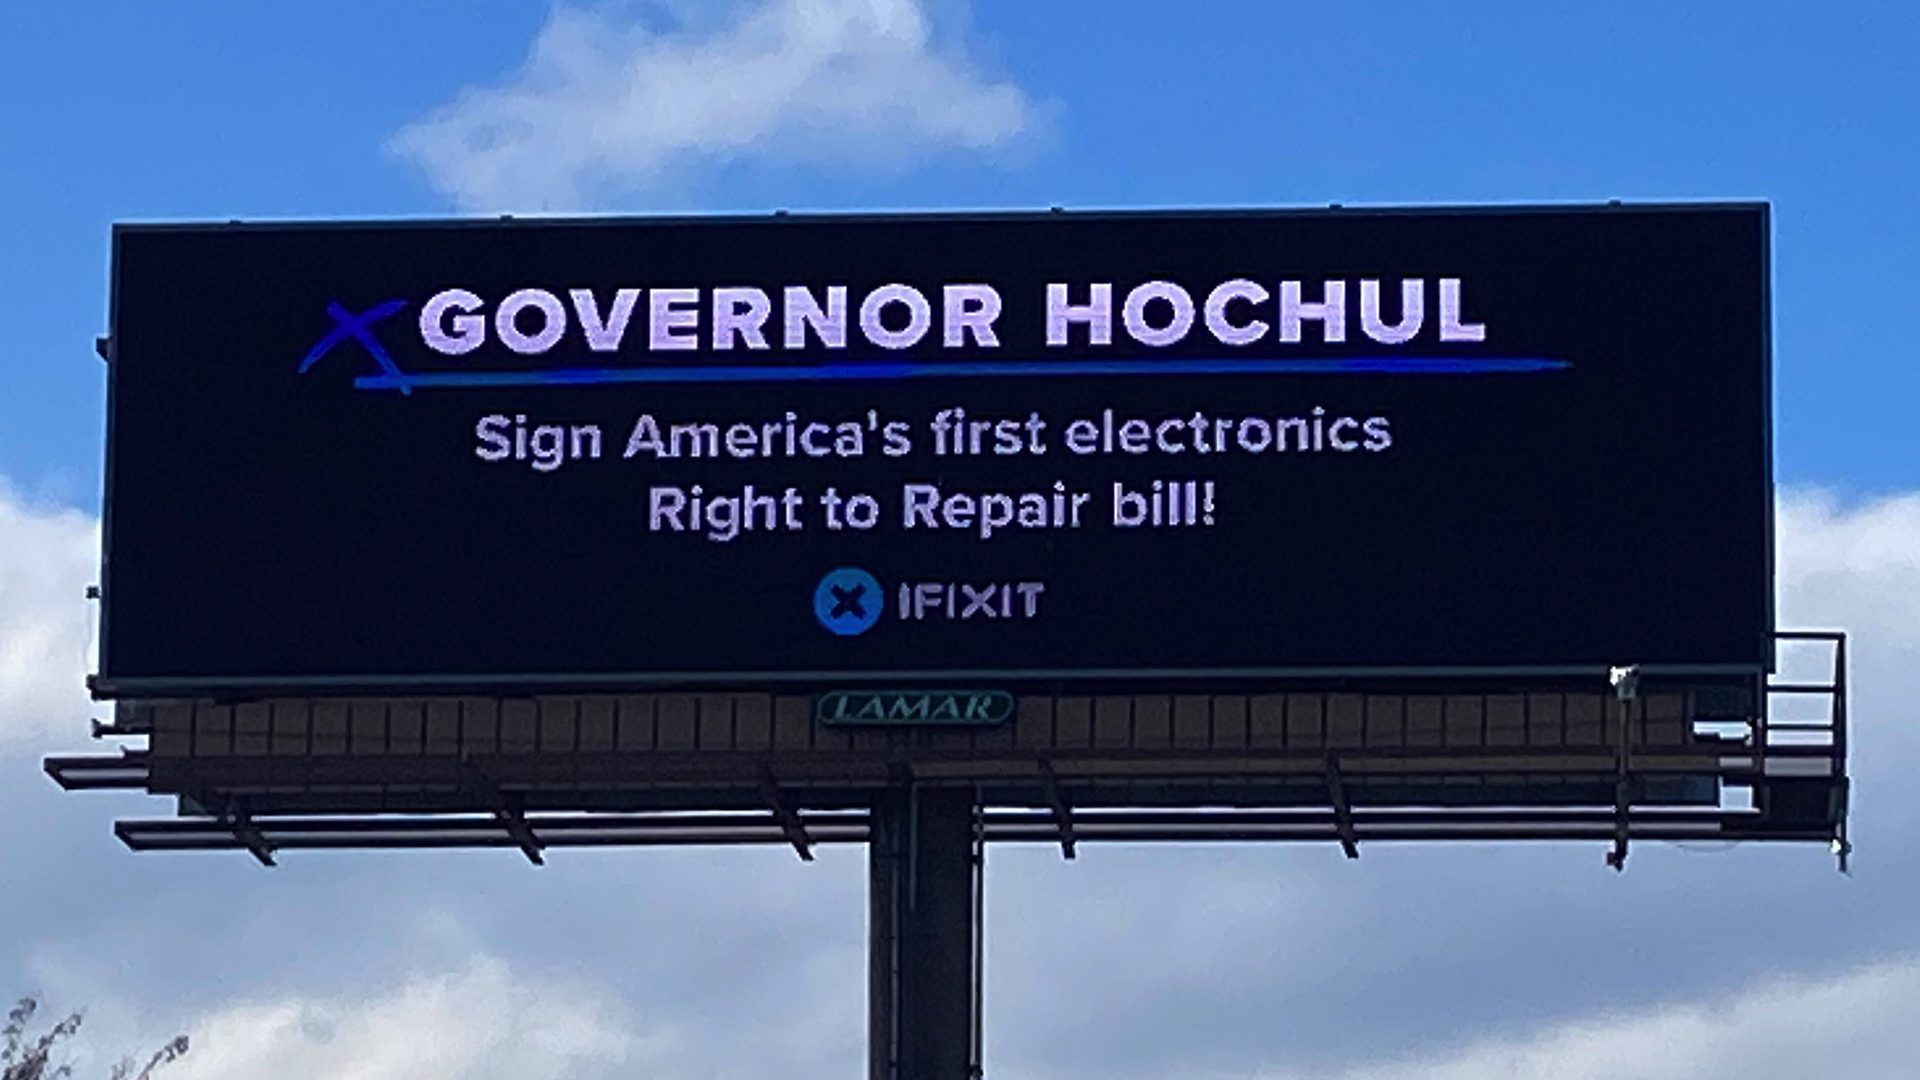 A photo of an iFixit-sponsored billboard encouraging Governor Hochul to sign the Digital Fair Repair Act